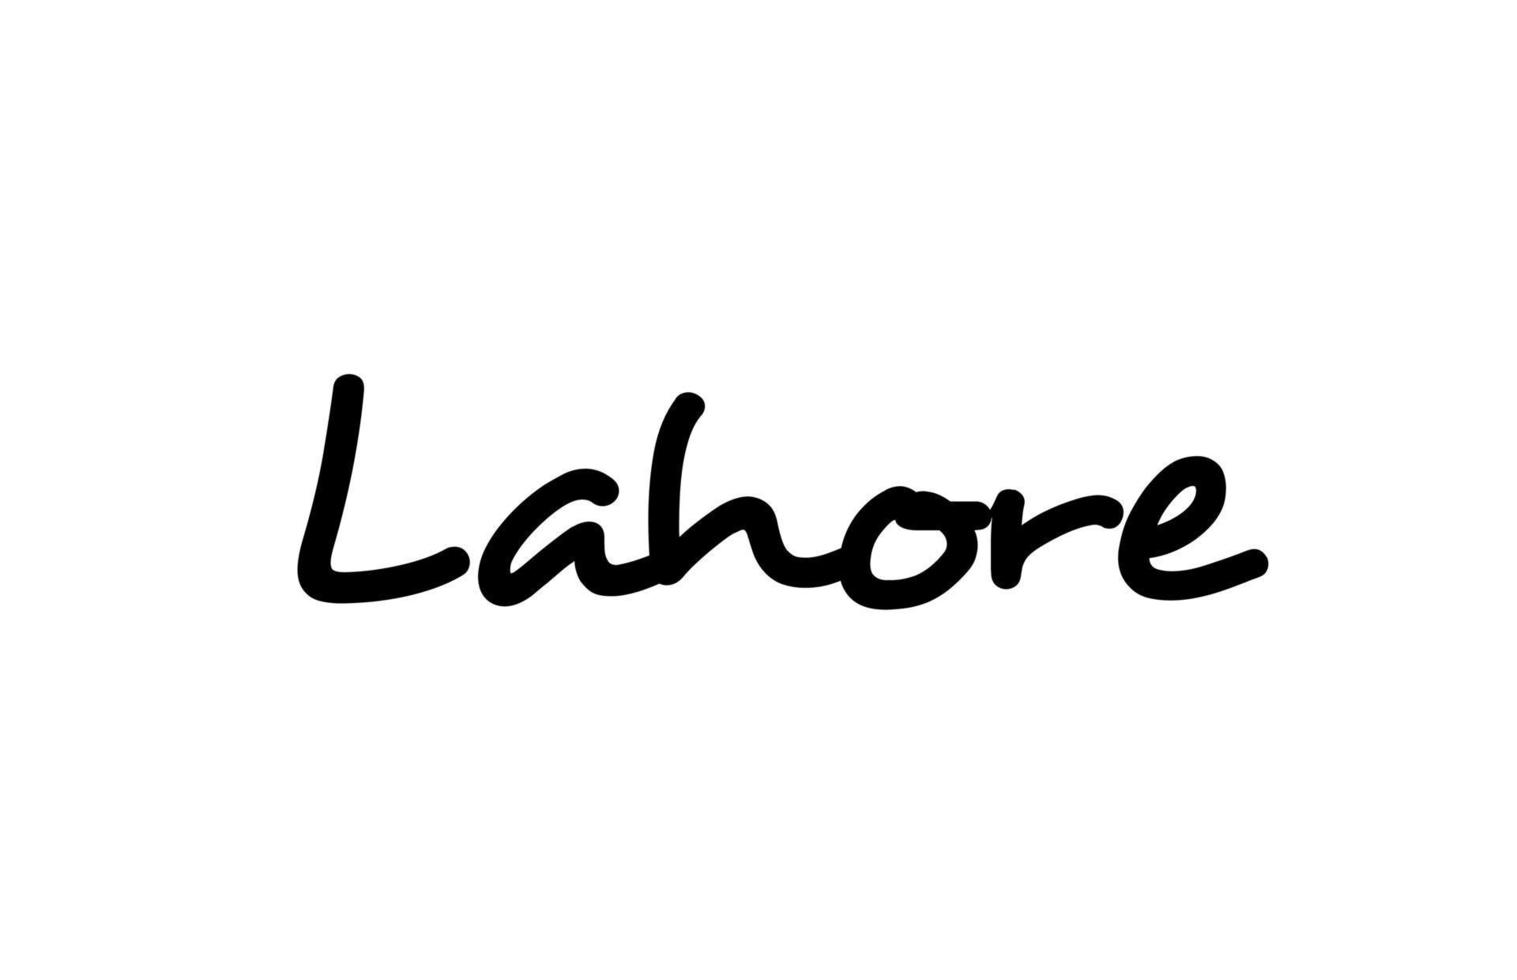 Lahore city handwritten word text hand lettering. Calligraphy text. Typography in black color vector